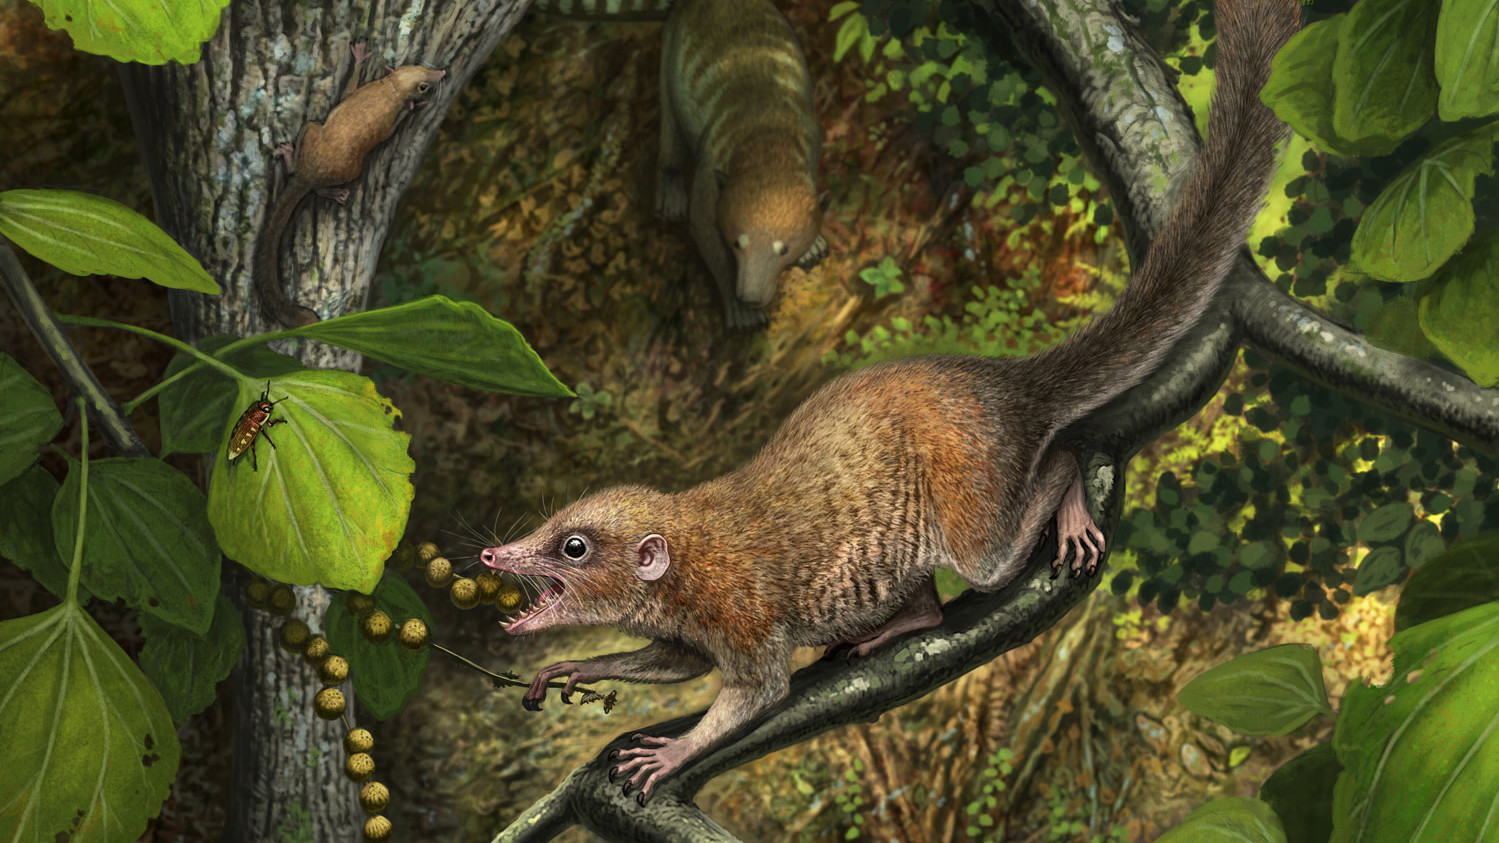 Artist's depiction of Purgatorius mckeeveri. (Image: Primates Emerged Almost Immediately After the Dinosaurs Went Extinct, New Research Suggests)